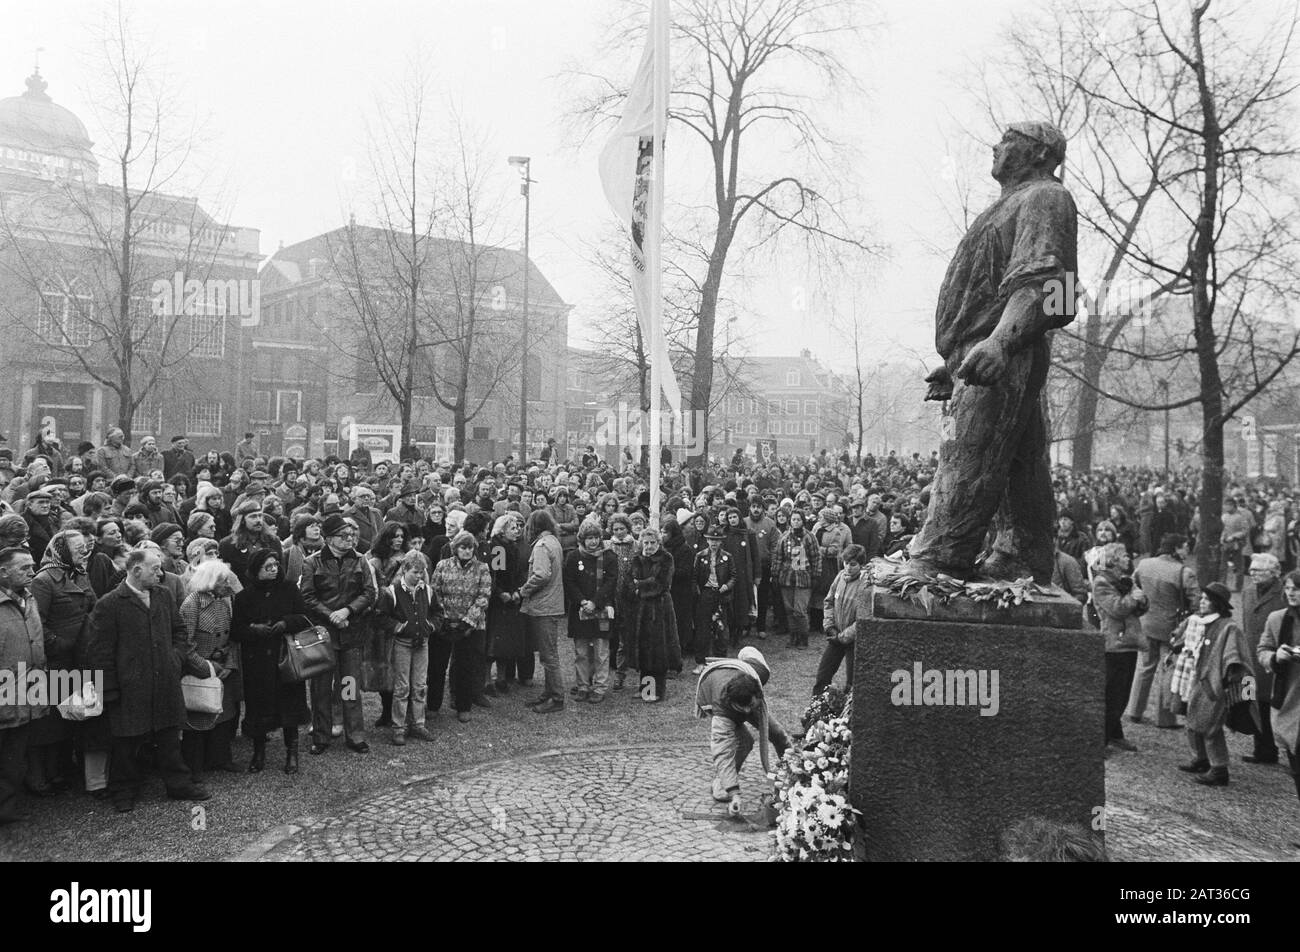 Commemoration February strike at the statue of De Dokwerker in Amsterdam where thousands of people participated Date: February 25, 1981 Location: Amsterdam, Noord-Holland Keywords: Dockers, commemorations, statues Stock Photo